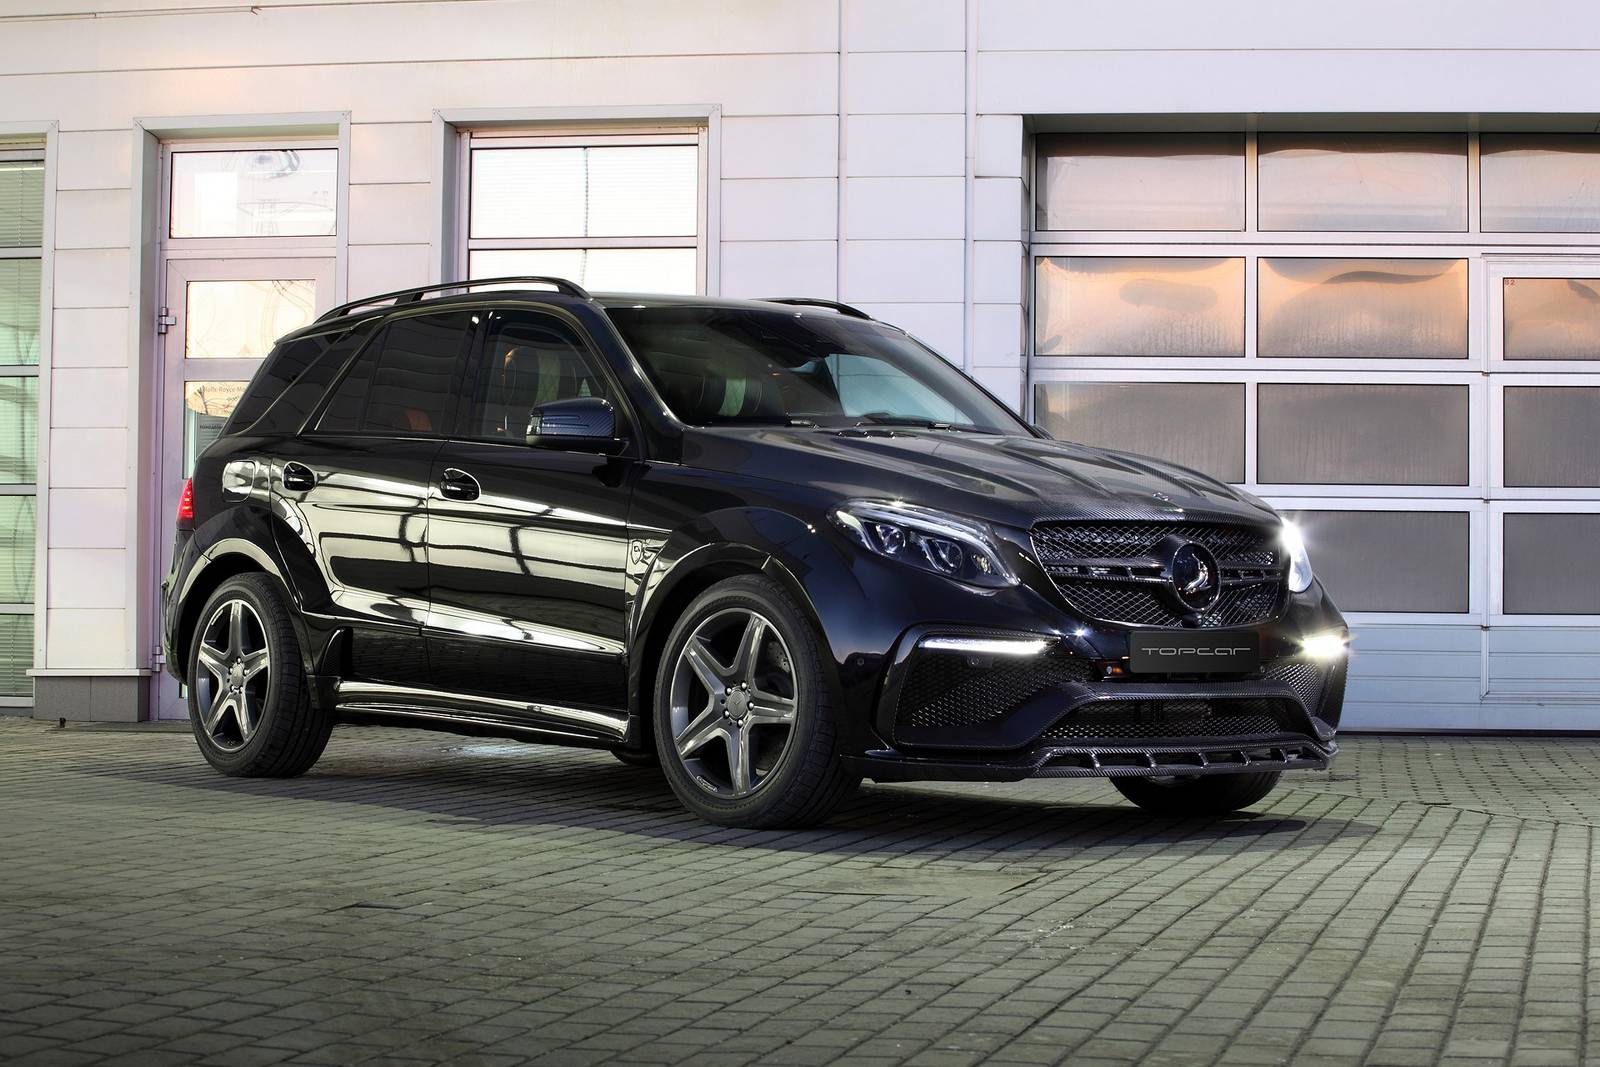 TopCar Mercedes GLE Guard Inferno Package